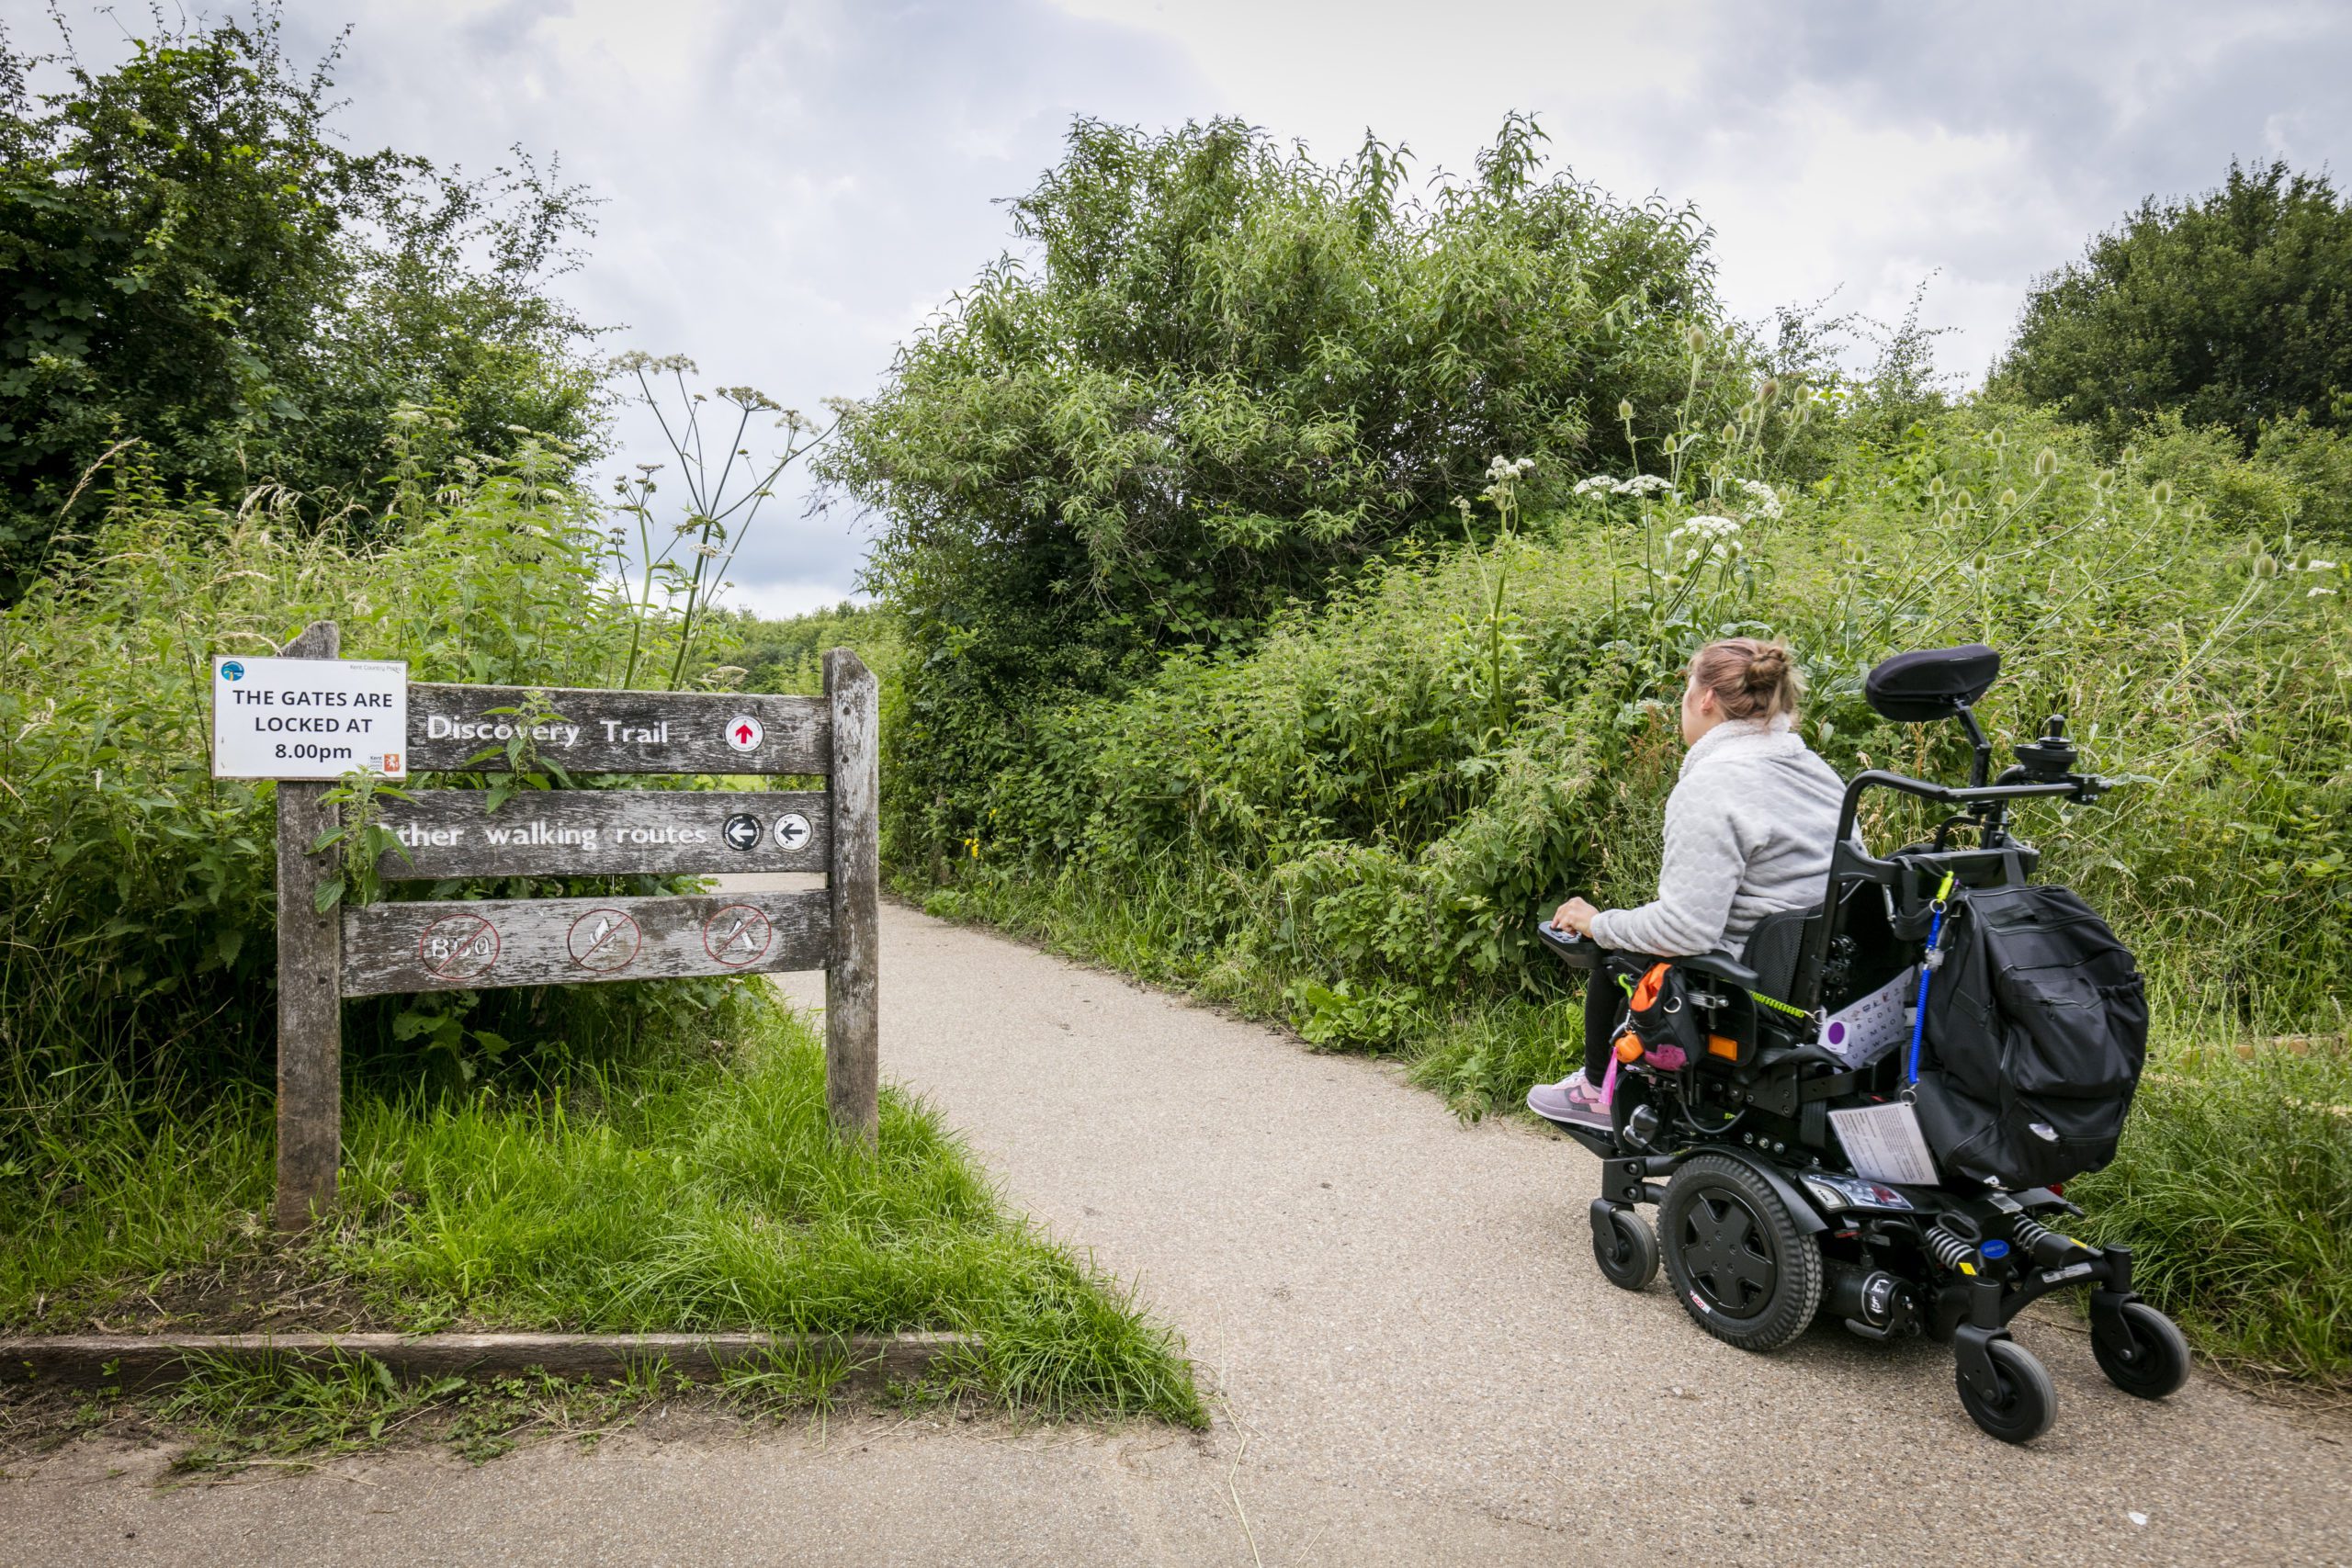 Person on wheelchair at Discovery Trail path, with trees and shrubs around.